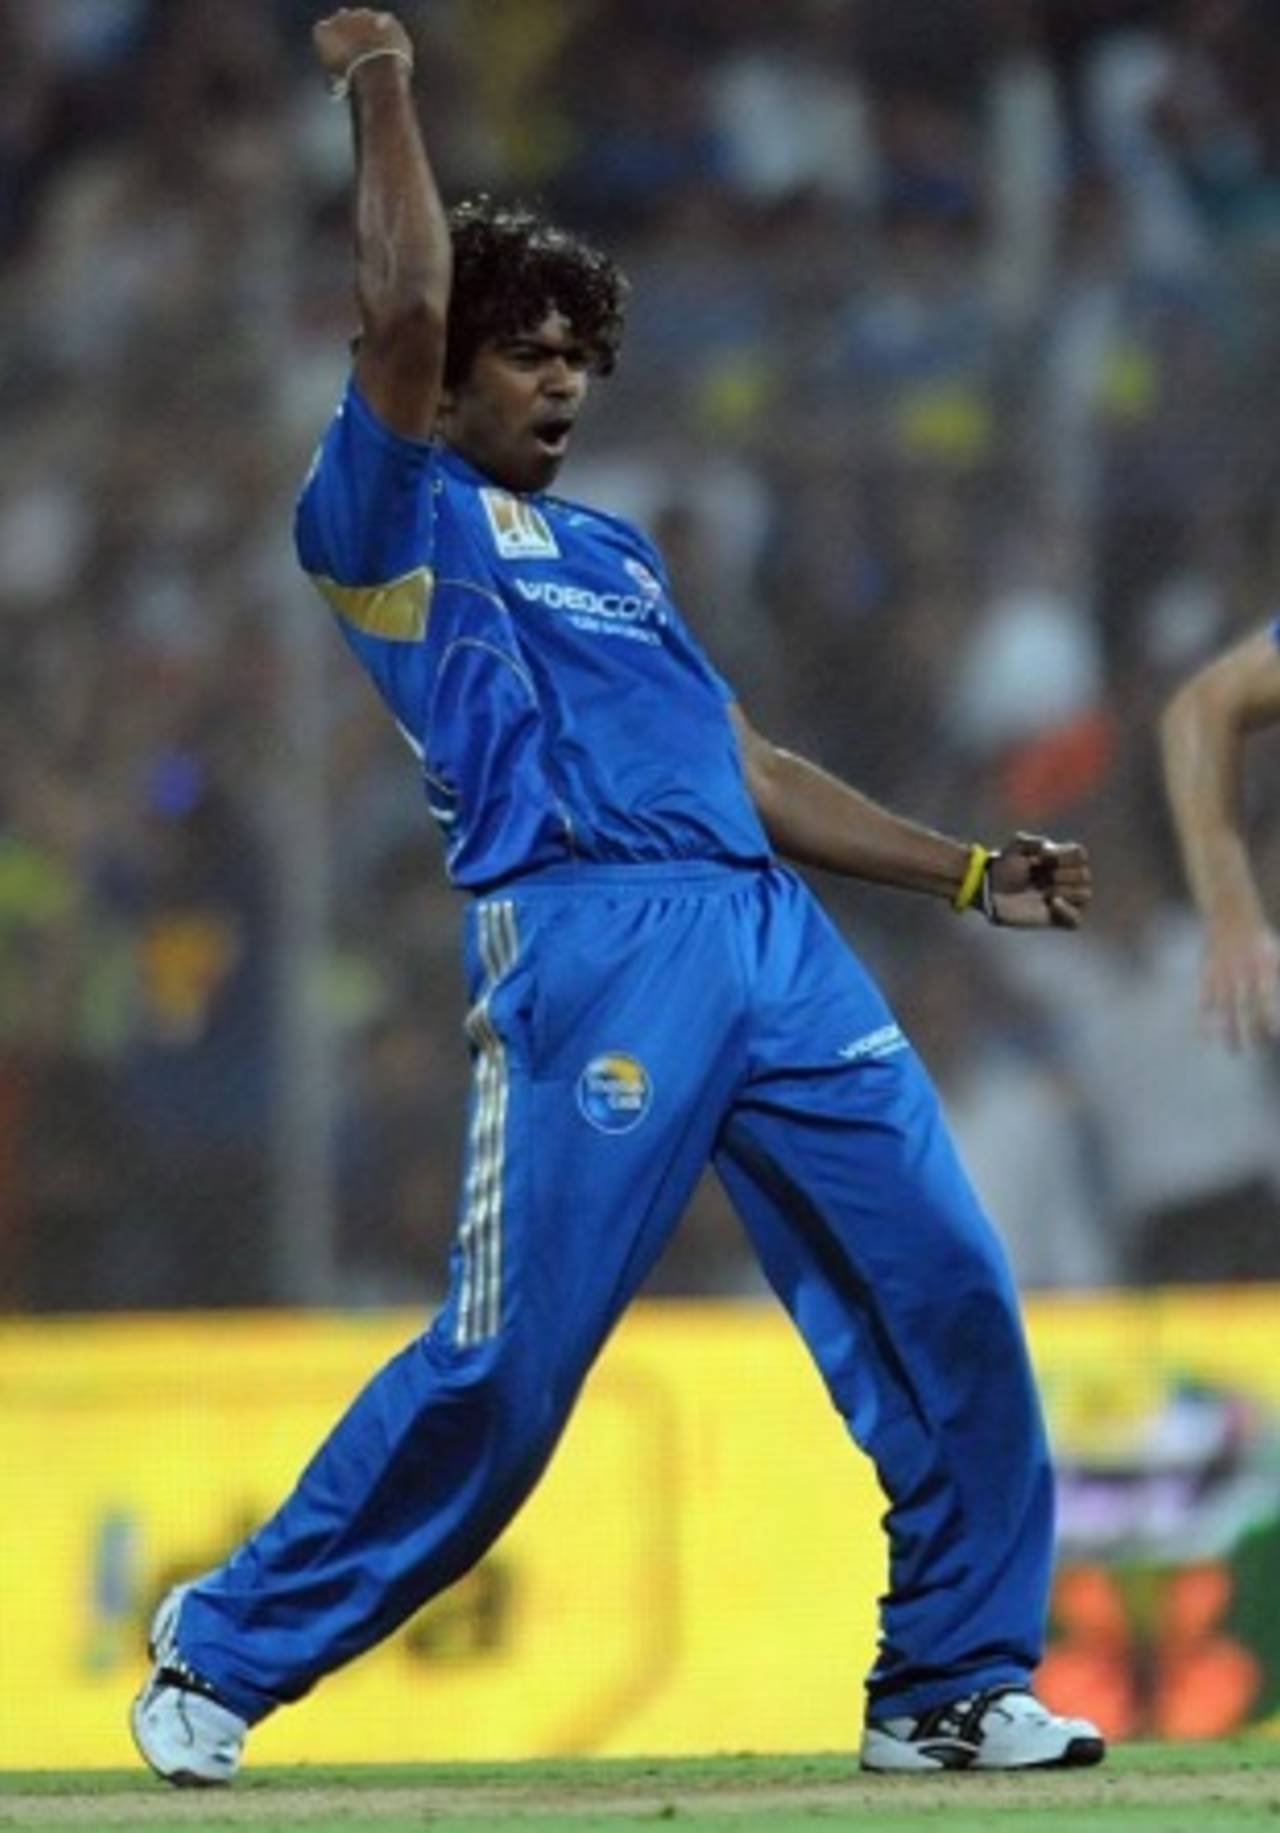 Lasith Malinga picked up 3 for 12, Deccan Chargers v Mumbai Indians, IPL, Mumbai (DY Patil), March 28, 2010